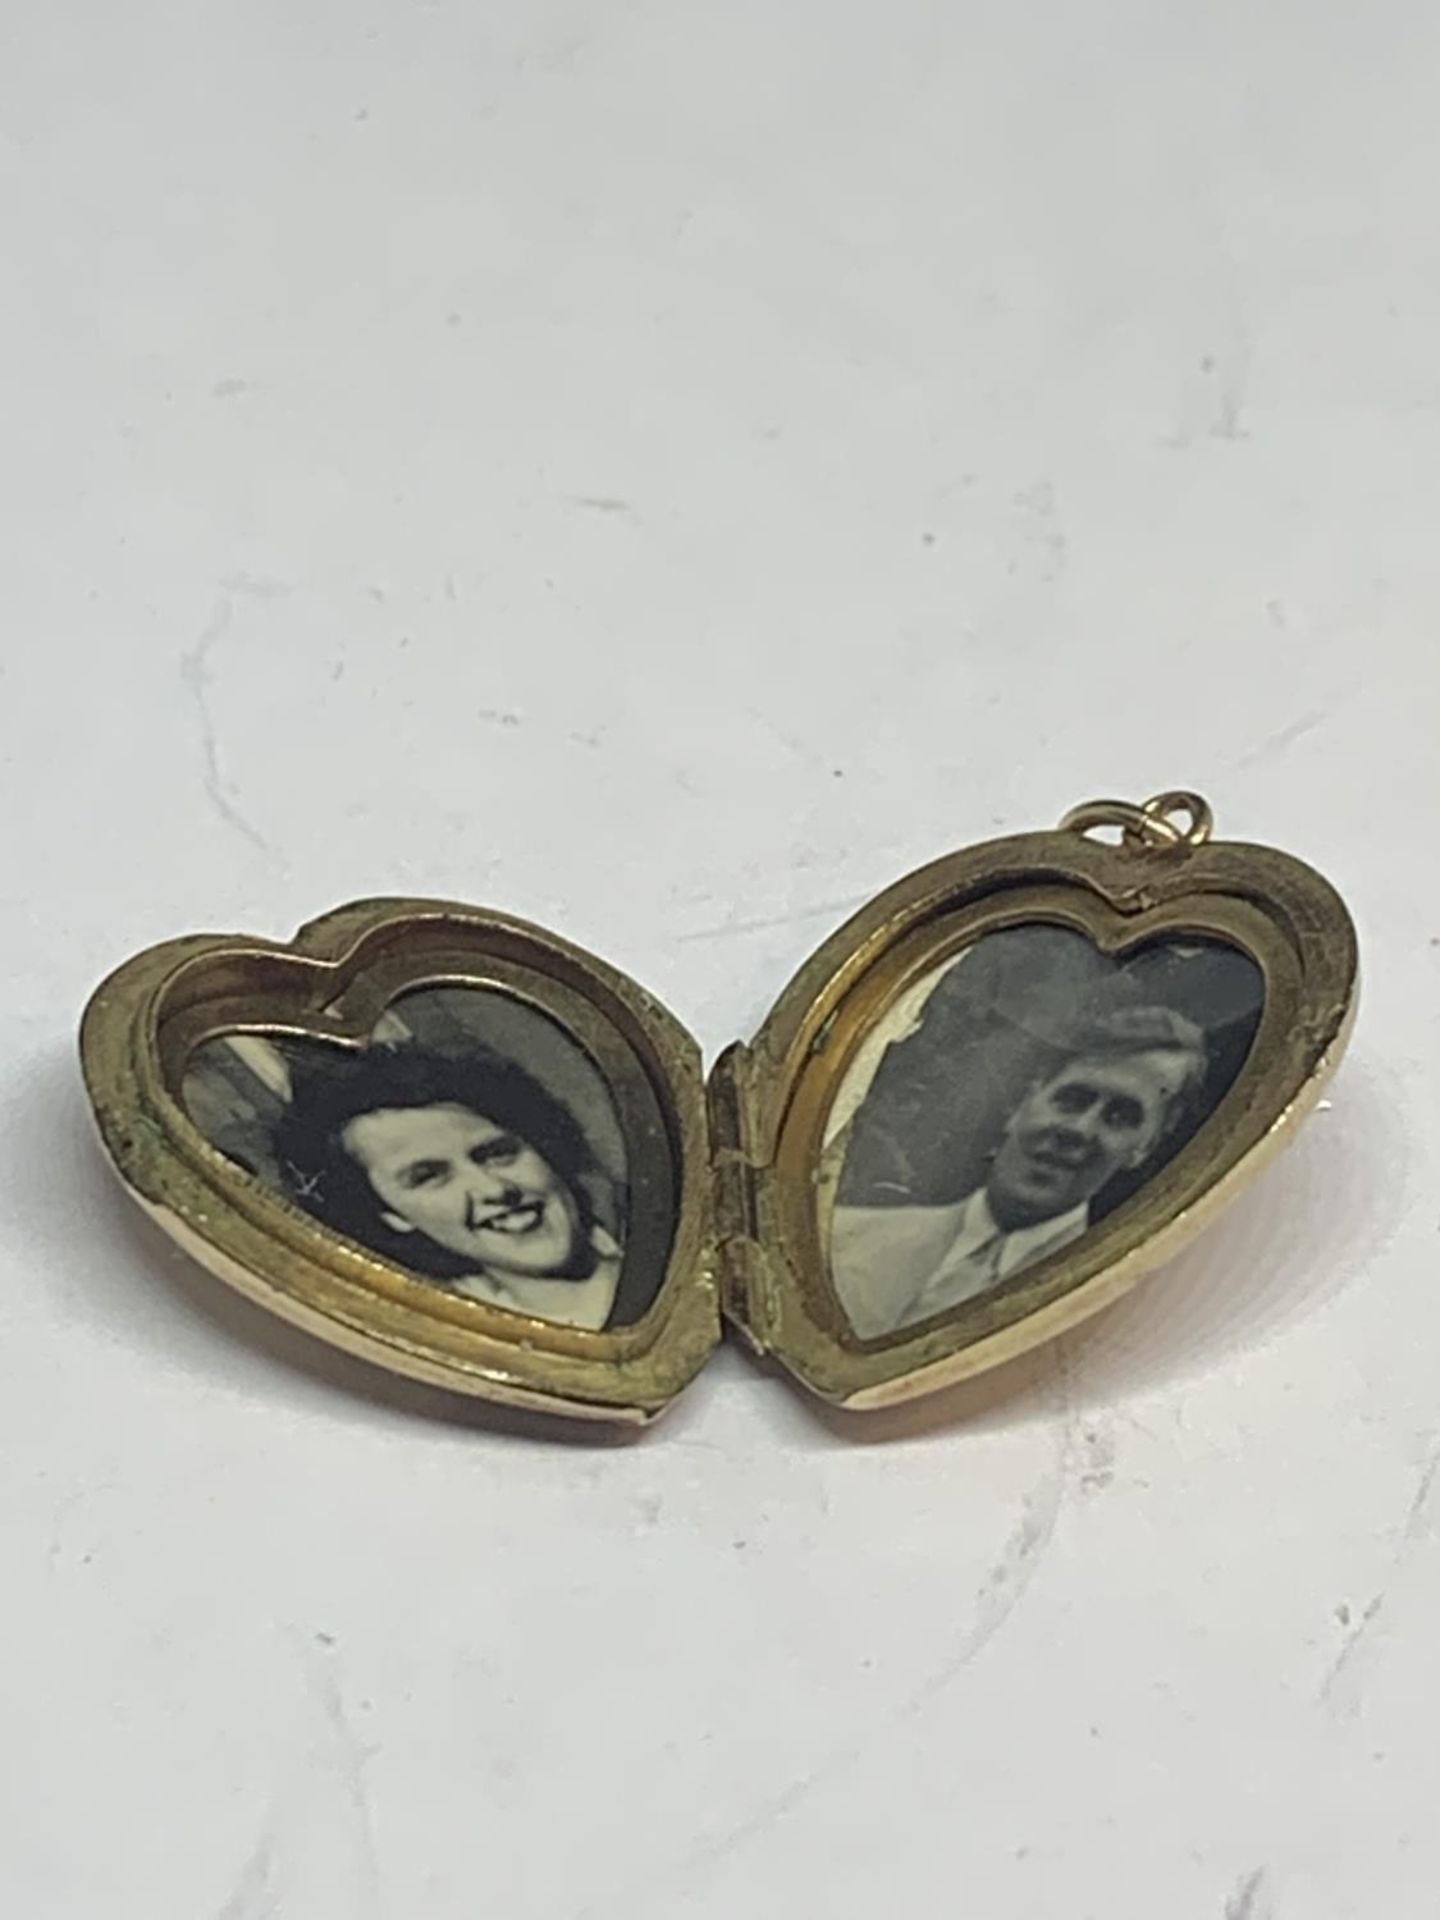 A 9 CARAT GOLD HEART SHAPED LOCKET WITH VINTAGE PHOTOGRAPHS GROSS WEIGHT 3.5 GRAMS - Image 3 of 3